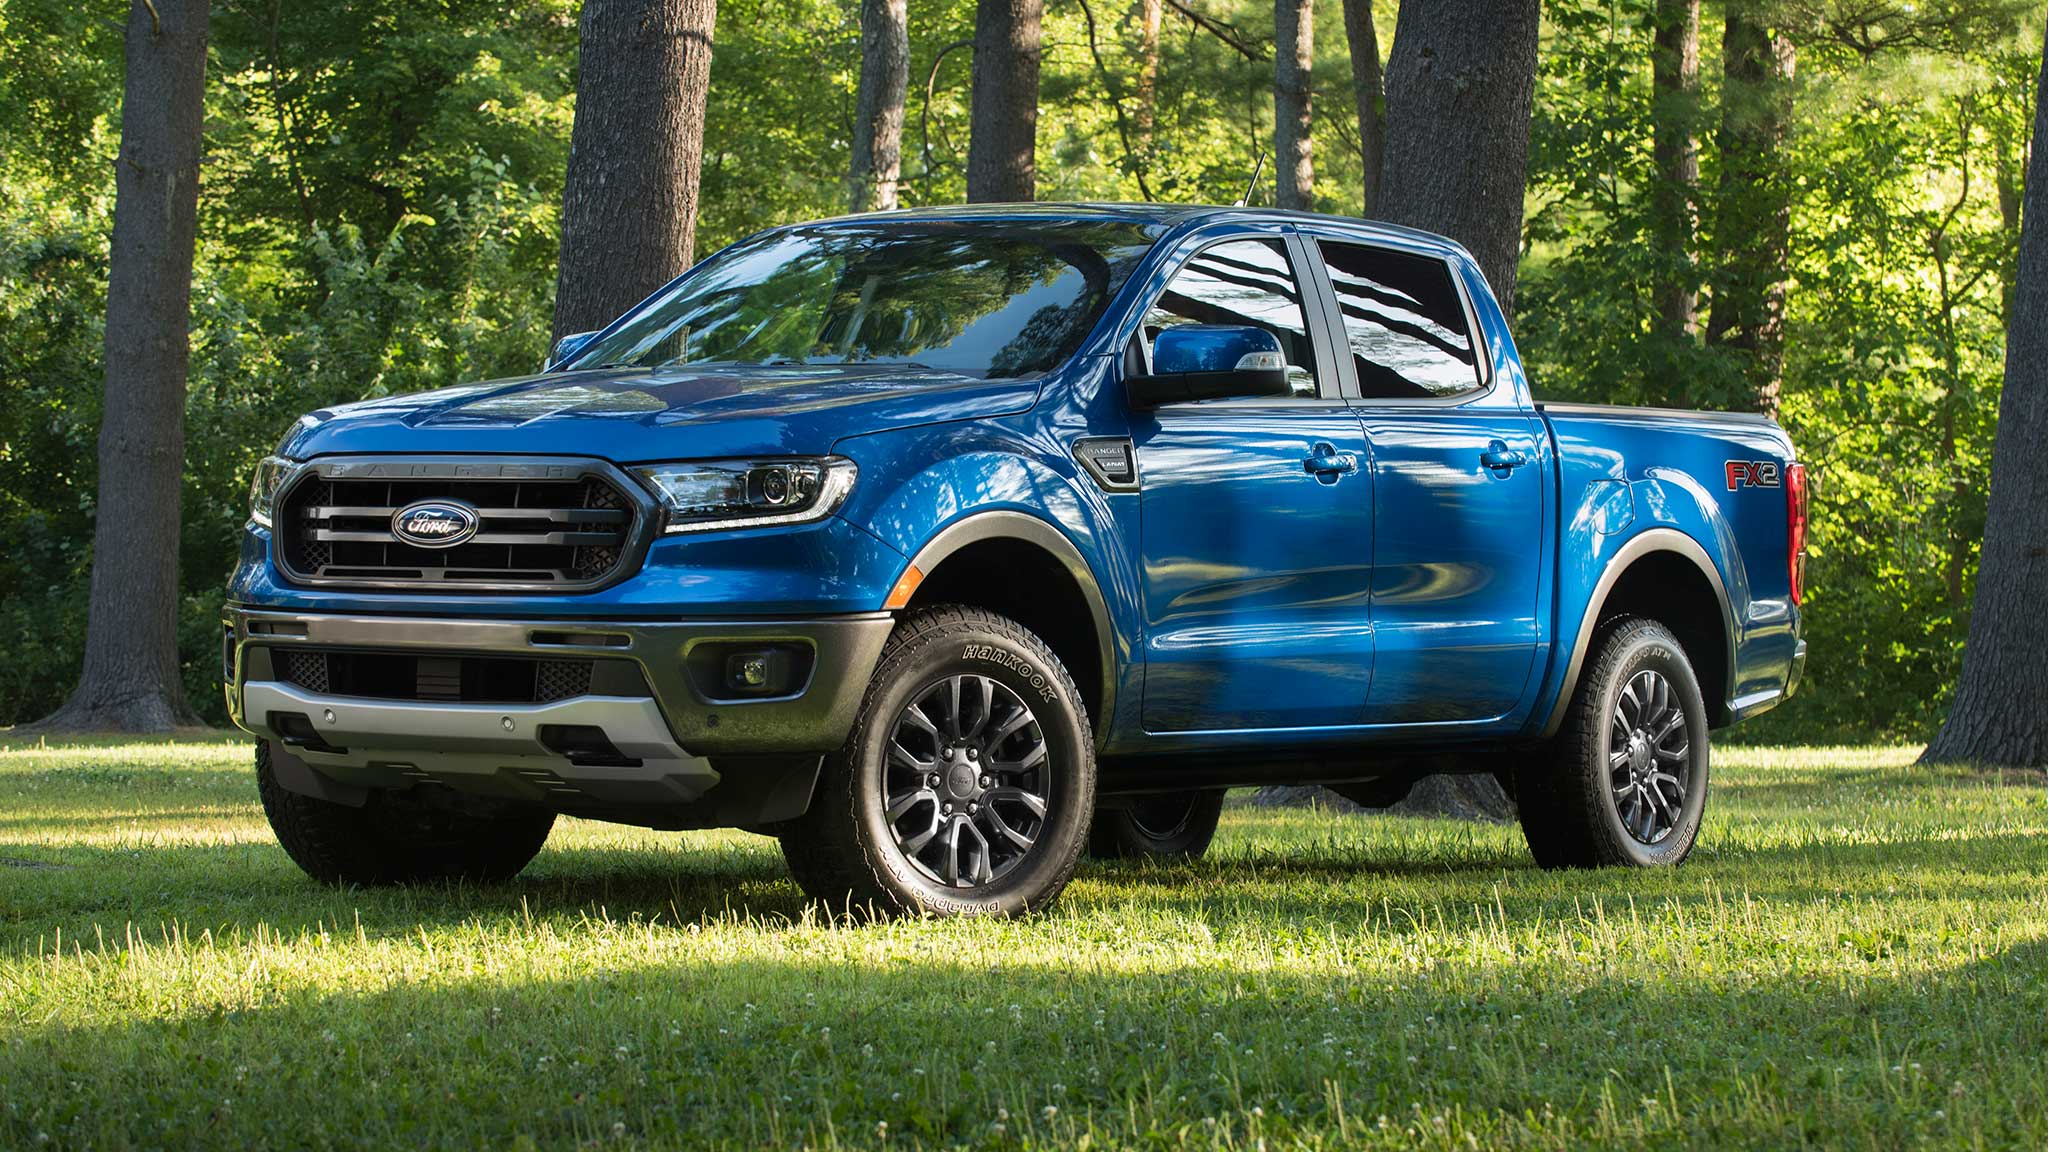 Ford Ranger Buyer's Guide: Reviews, Specs, Comparisons